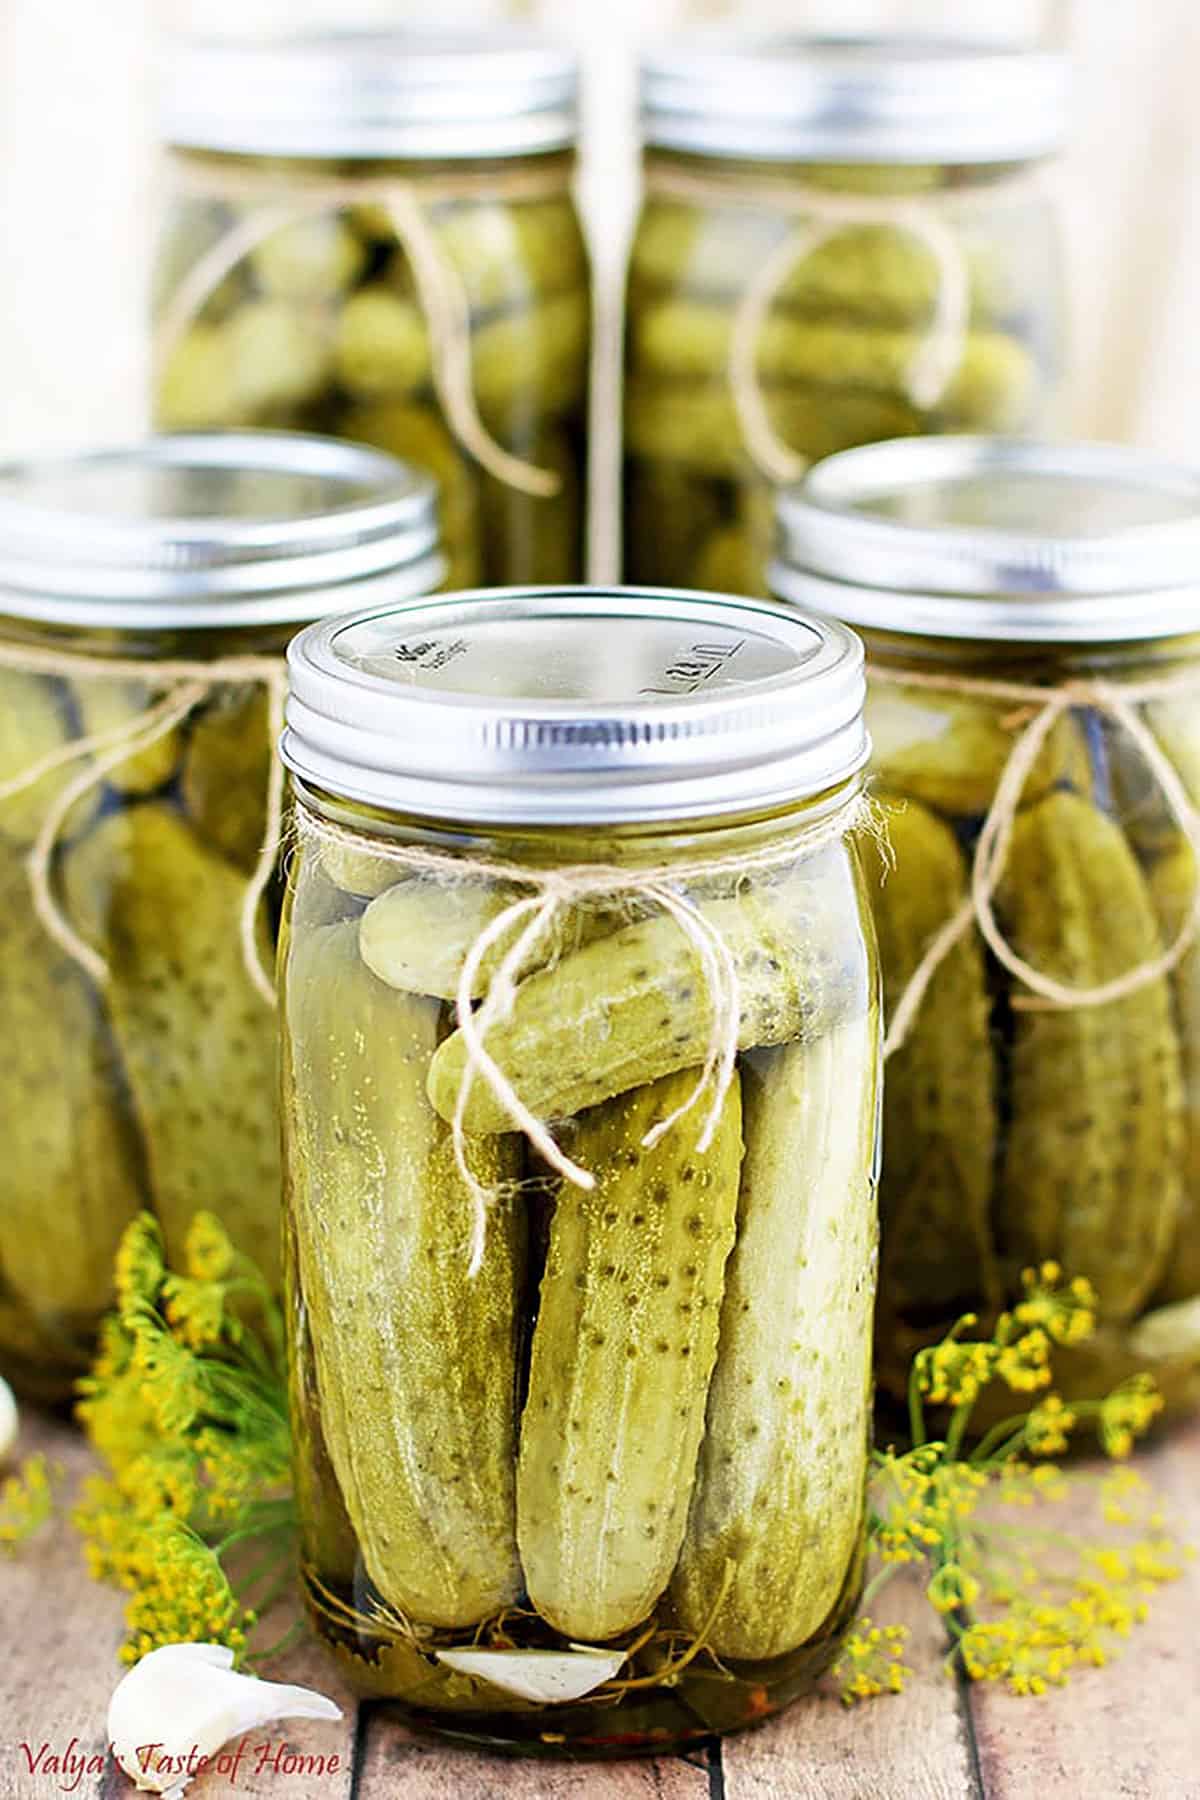 If you're looking for the best homemade Dill Pickle recipe, then this is the perfect recipe for you!